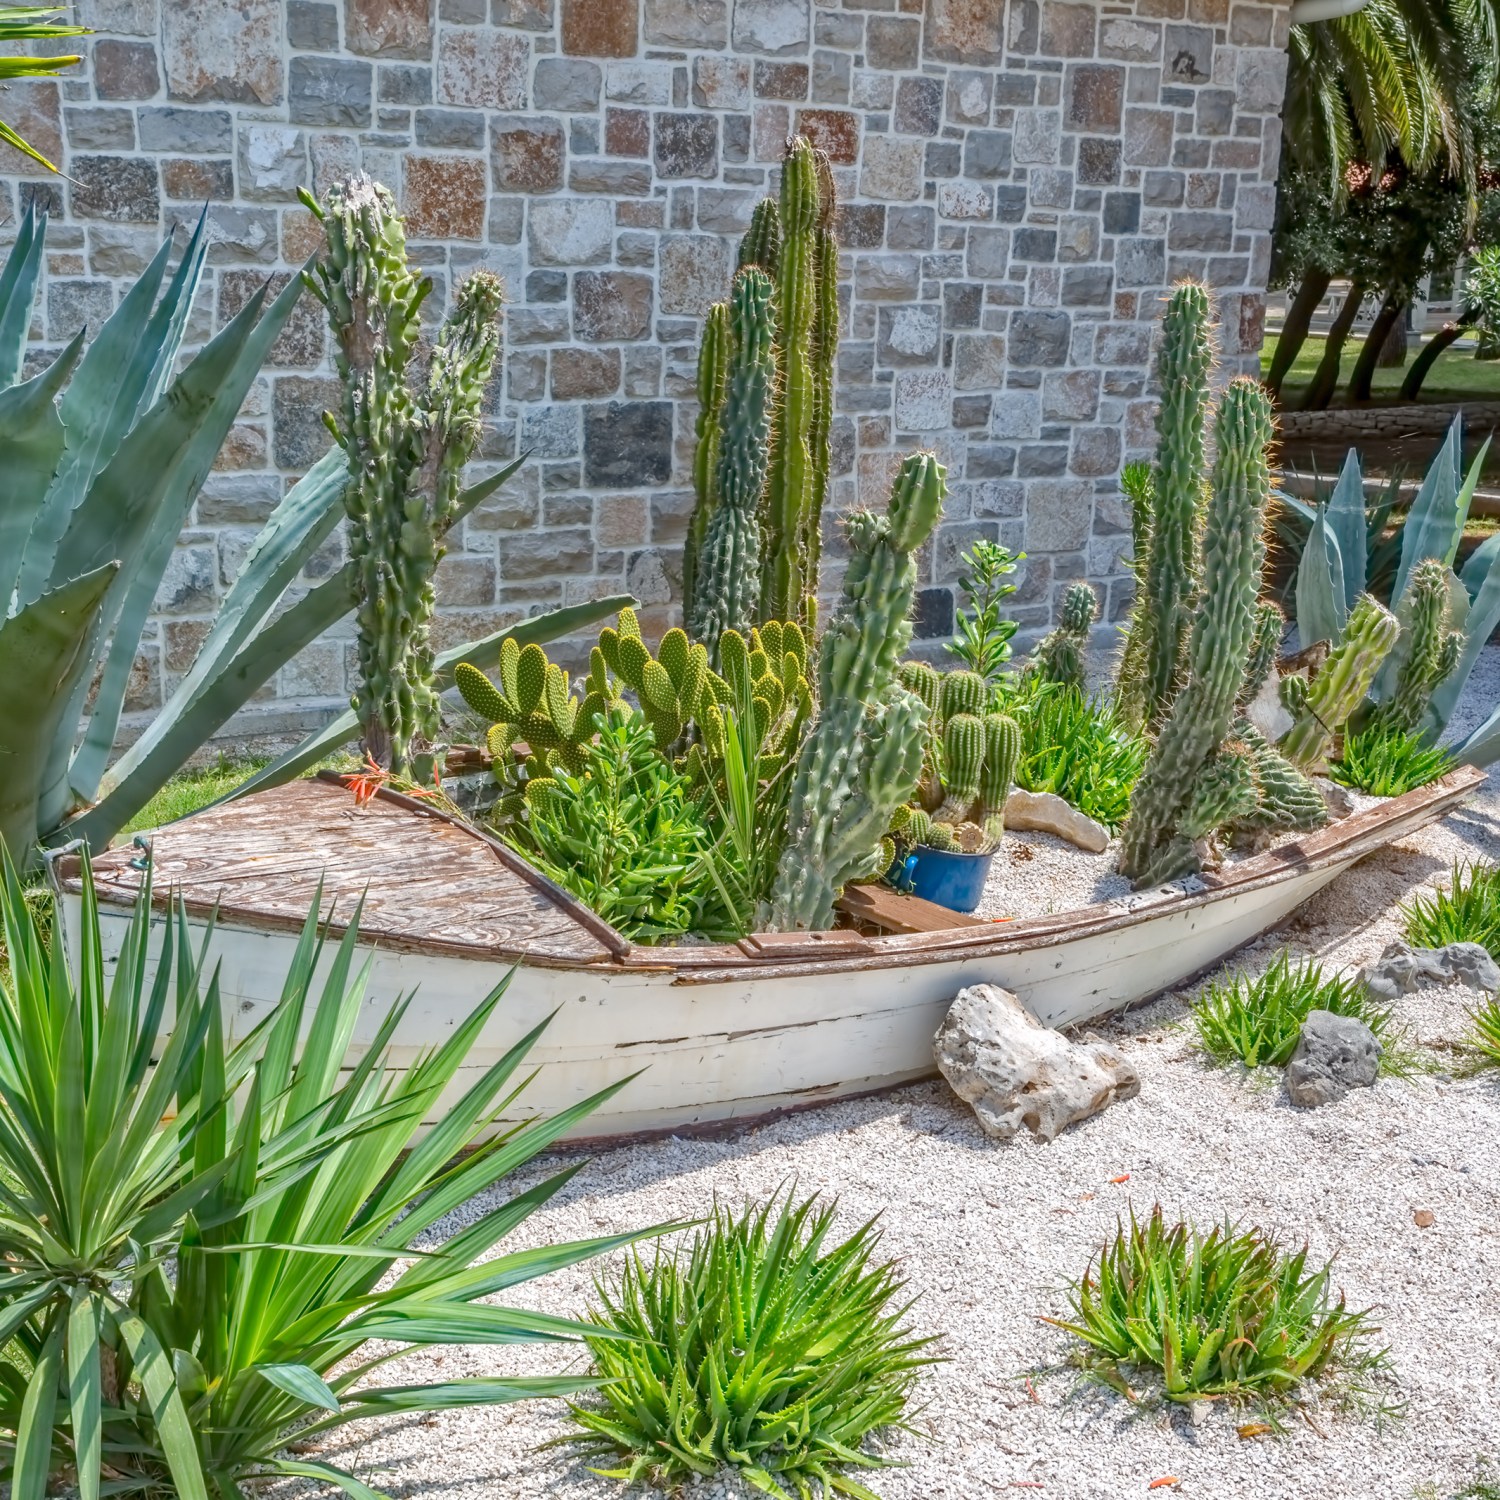 plants-dont-water-drought-boat-landscaping